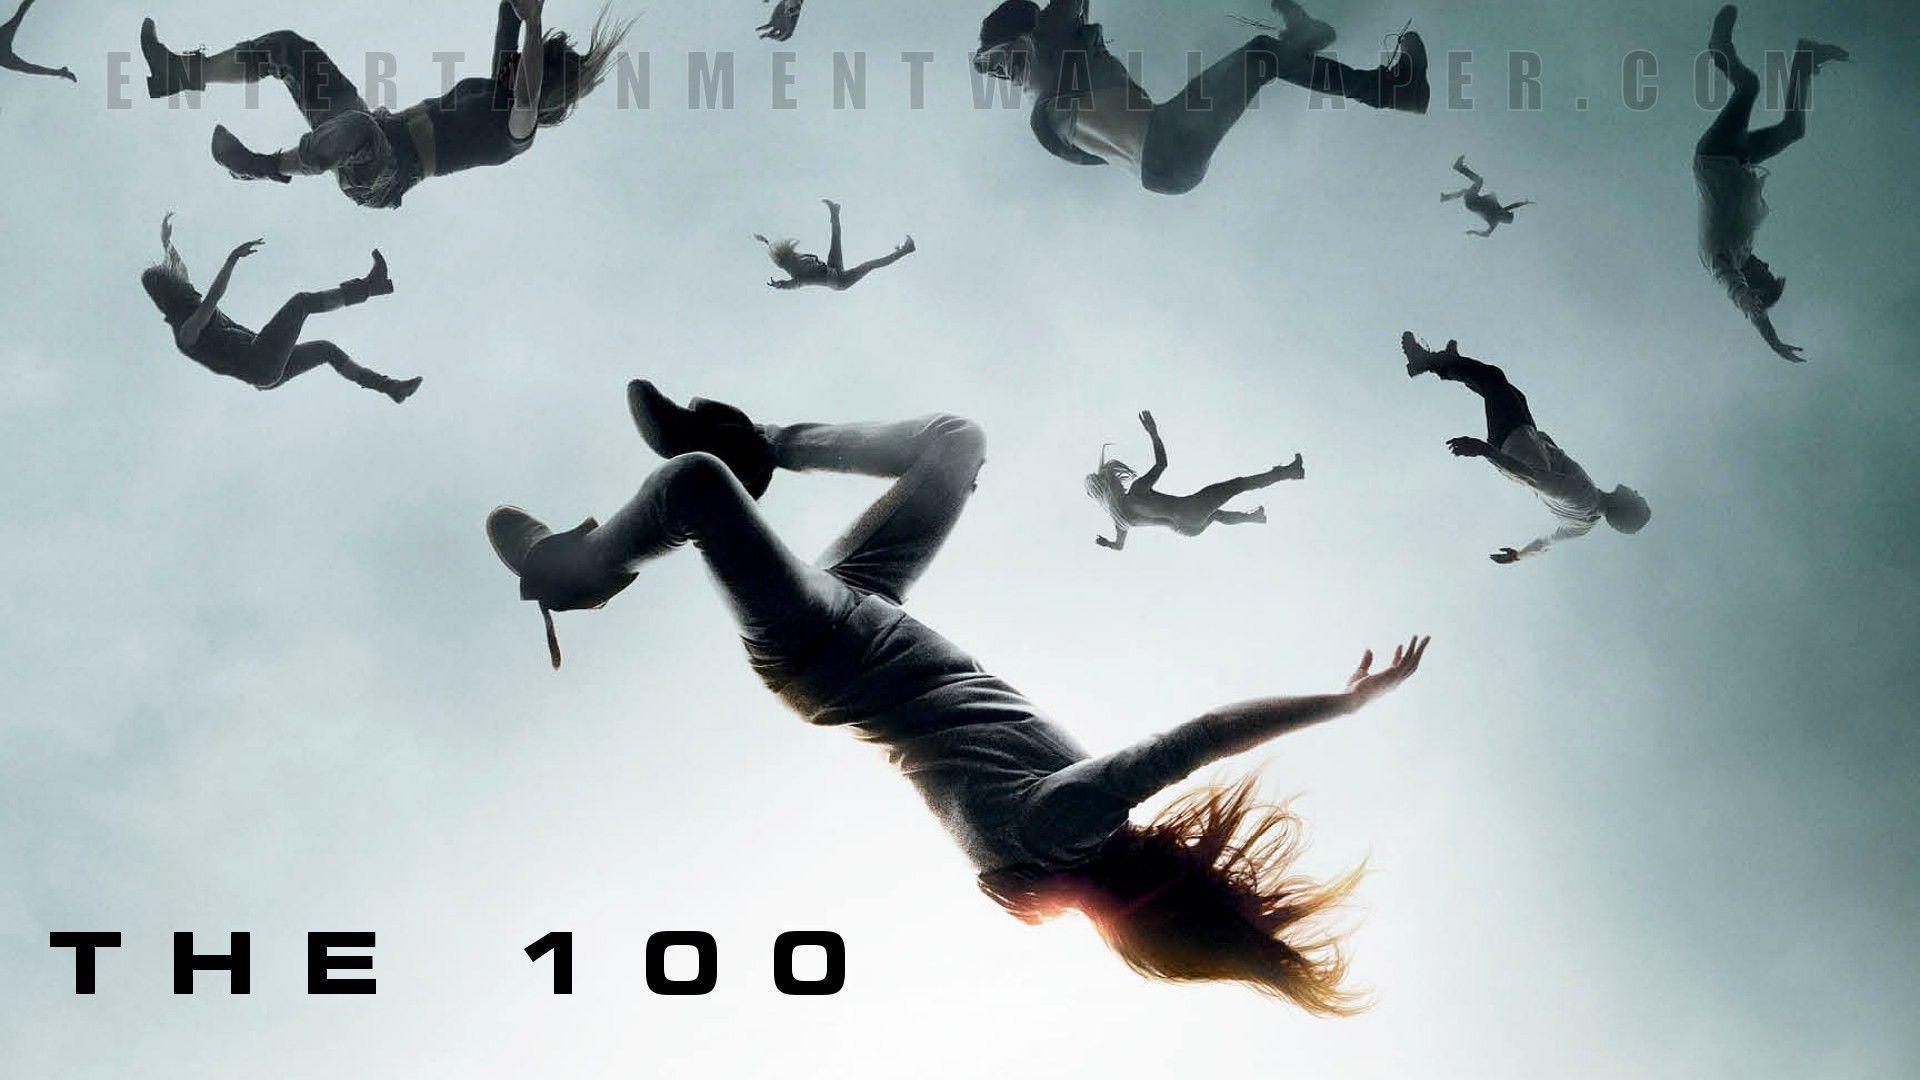 The 100 TV Series Wallpaper. Best of High Quality Image Wallpaper